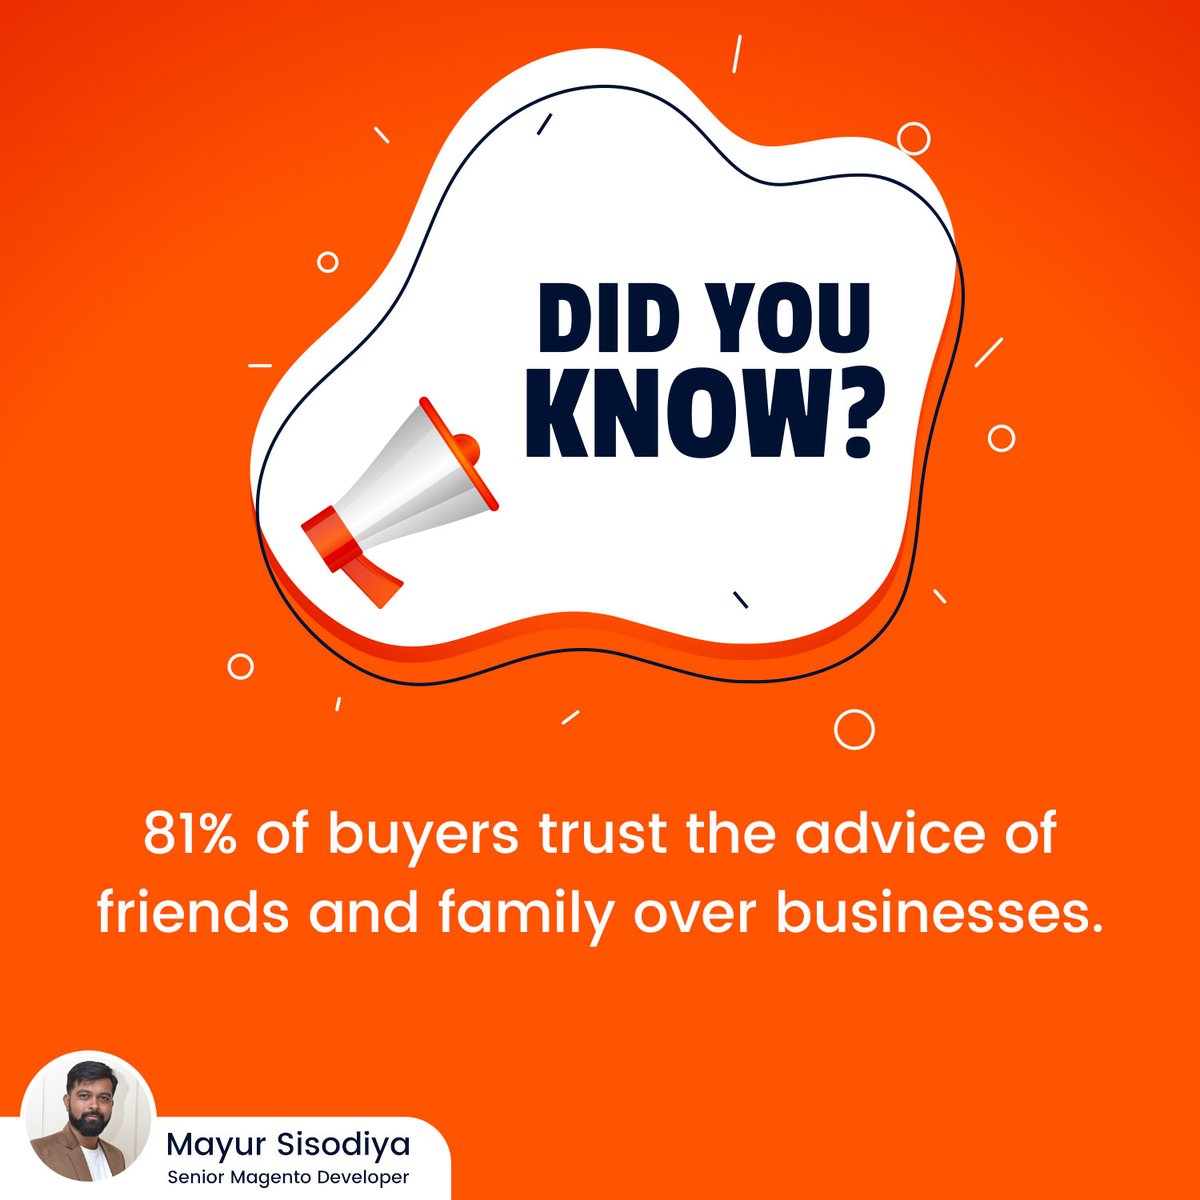 DID YOU KNOW ❓

81% of buyers trust the advice of friends and family over businesses.

#didyouknow #didyouknowfacts #ecommercefacts #researchstudy #factsdaily #factlovers #dailyfacts #instafacts #worldfacts #realfacts #amazingfacts #coolfacts #interestingfacts #truefacts